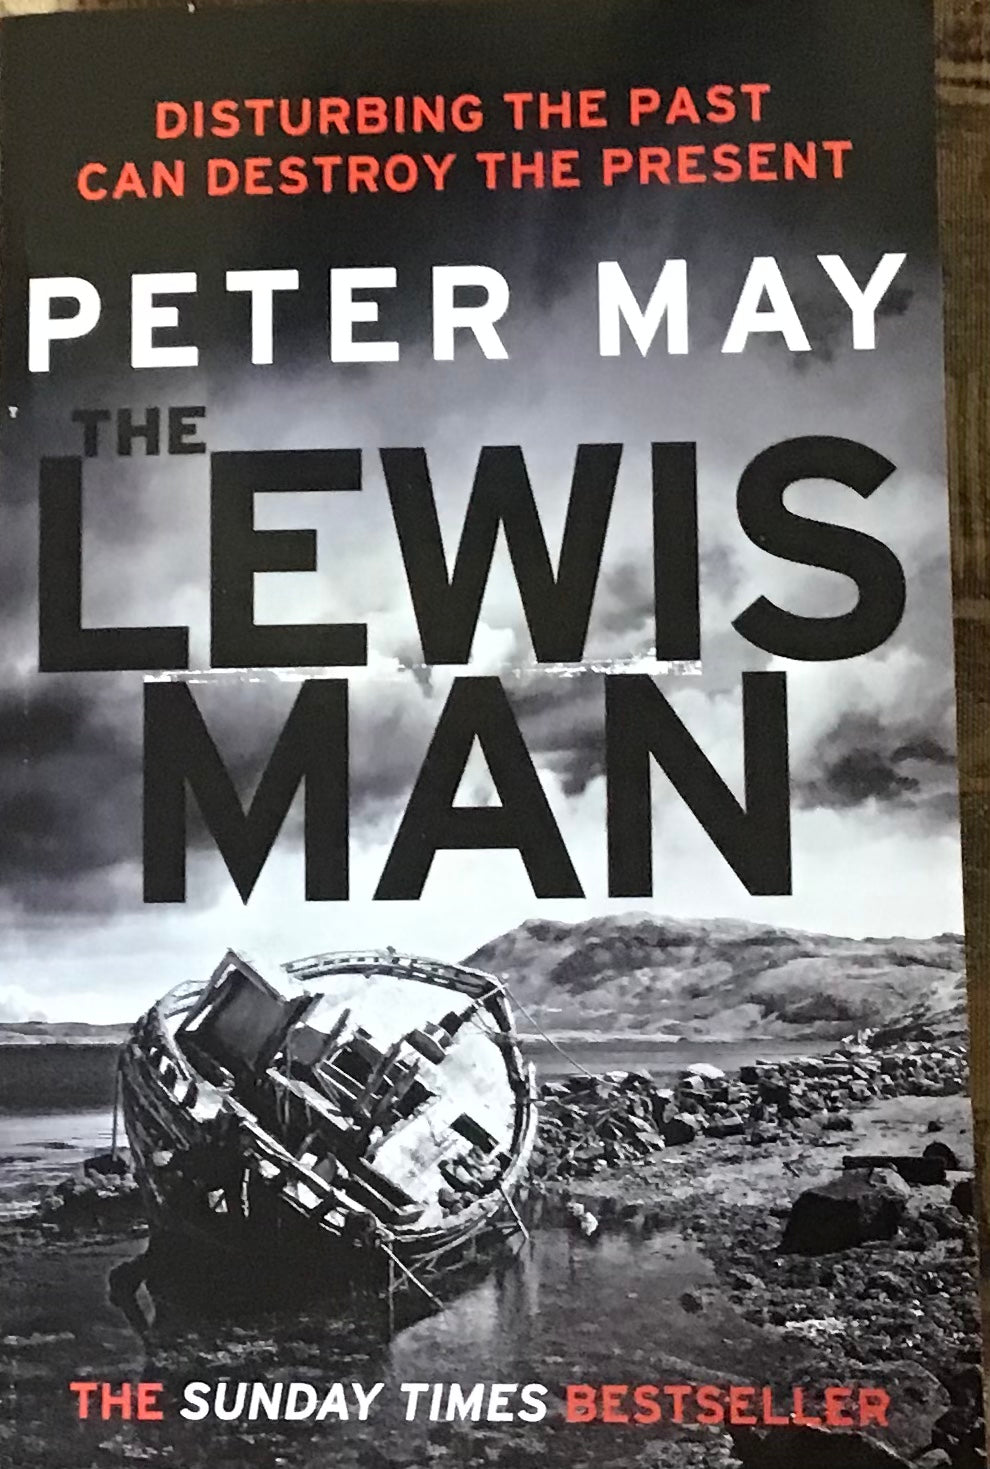 The Lewis Man, Peter May